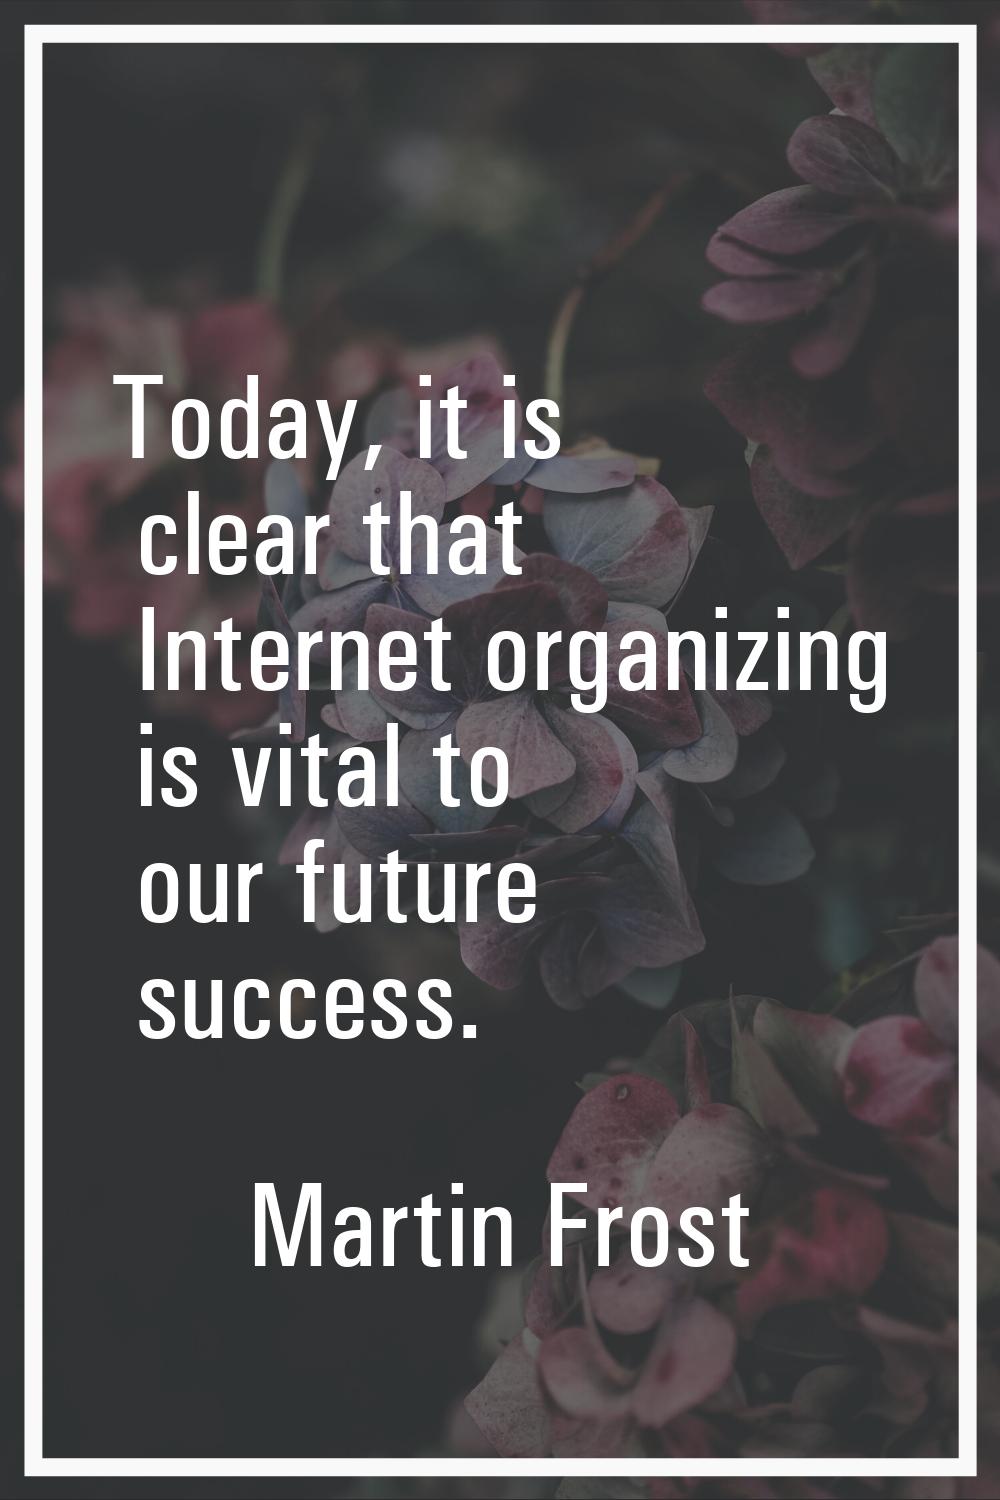 Today, it is clear that Internet organizing is vital to our future success.